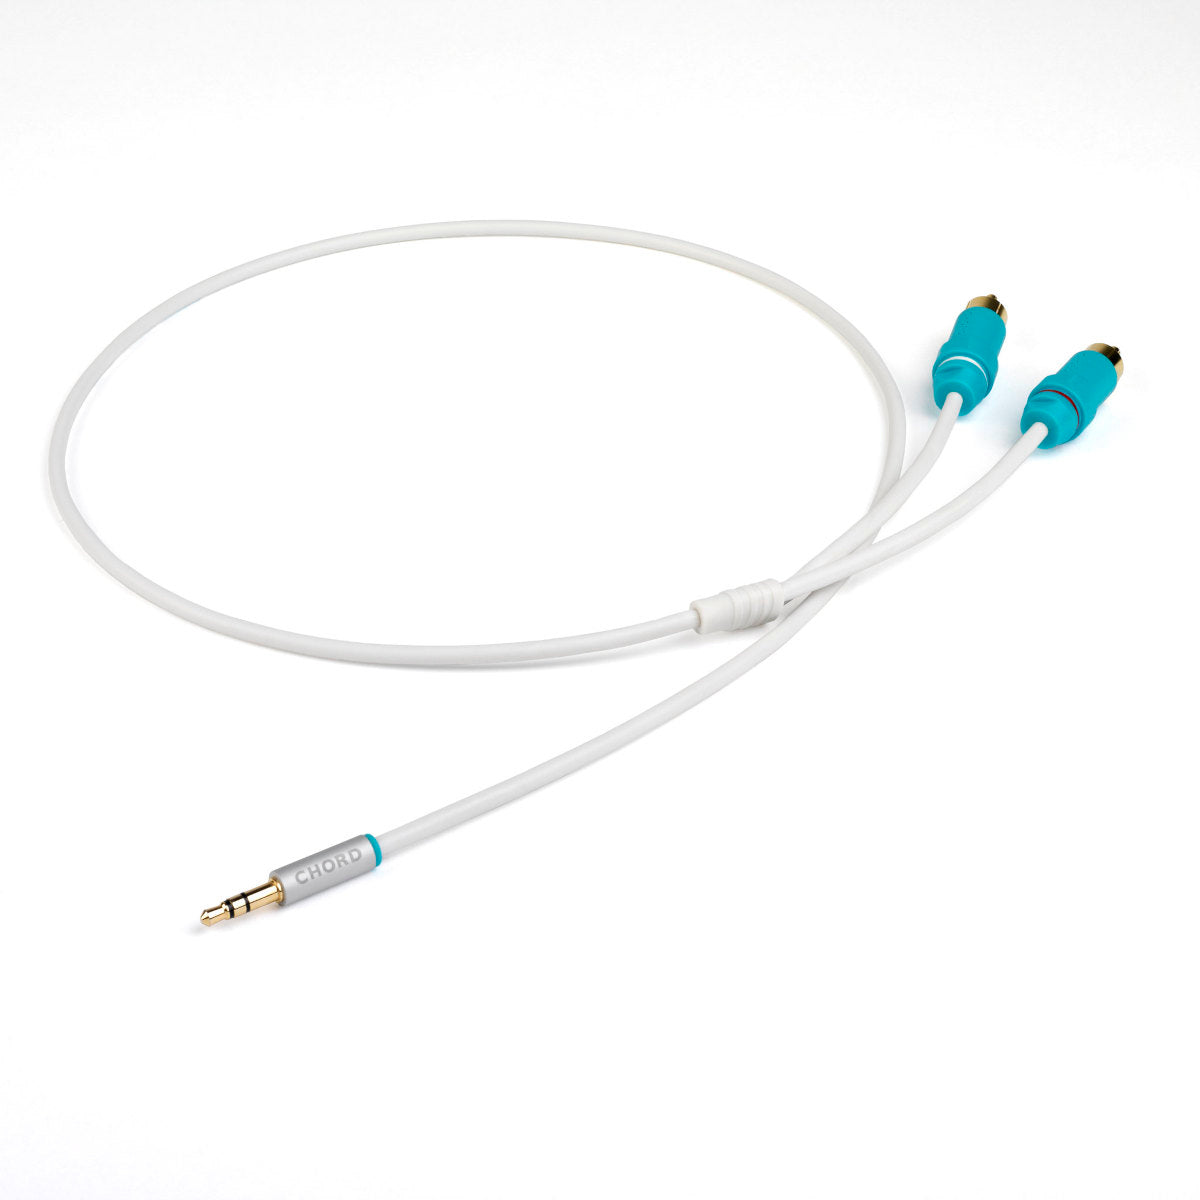 Chord C-Jack Cable